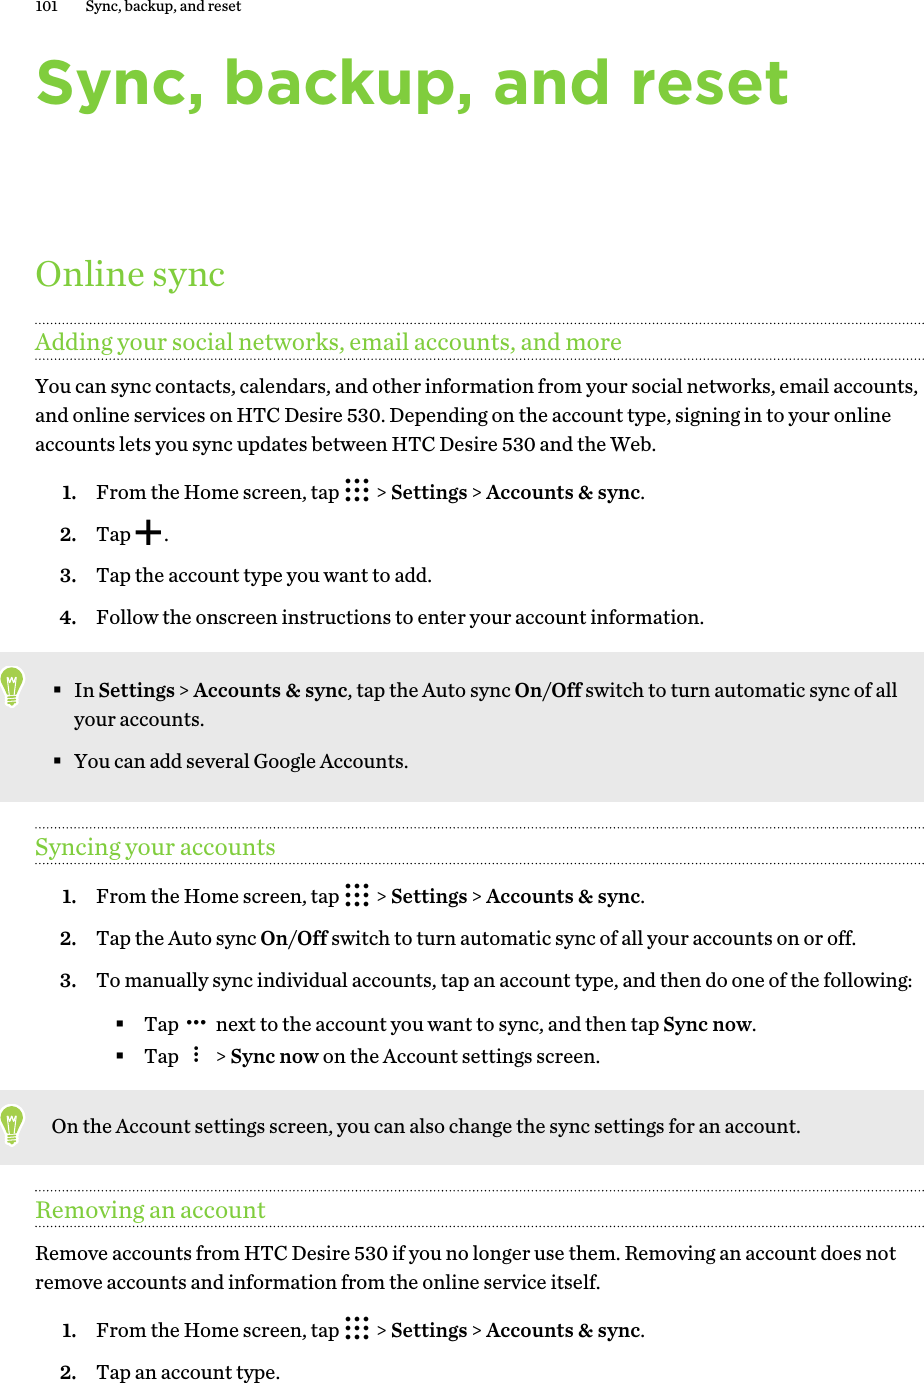 Sync, backup, and resetOnline syncAdding your social networks, email accounts, and moreYou can sync contacts, calendars, and other information from your social networks, email accounts,and online services on HTC Desire 530. Depending on the account type, signing in to your onlineaccounts lets you sync updates between HTC Desire 530 and the Web.1. From the Home screen, tap   &gt; Settings &gt; Accounts &amp; sync.2. Tap  .3. Tap the account type you want to add.4. Follow the onscreen instructions to enter your account information.§In Settings &gt; Accounts &amp; sync, tap the Auto sync On/Off switch to turn automatic sync of allyour accounts.§You can add several Google Accounts.Syncing your accounts1. From the Home screen, tap   &gt; Settings &gt; Accounts &amp; sync.2. Tap the Auto sync On/Off switch to turn automatic sync of all your accounts on or off.3. To manually sync individual accounts, tap an account type, and then do one of the following:§Tap   next to the account you want to sync, and then tap Sync now.§Tap   &gt; Sync now on the Account settings screen.On the Account settings screen, you can also change the sync settings for an account.Removing an accountRemove accounts from HTC Desire 530 if you no longer use them. Removing an account does notremove accounts and information from the online service itself.1. From the Home screen, tap   &gt; Settings &gt; Accounts &amp; sync.2. Tap an account type.101 Sync, backup, and reset